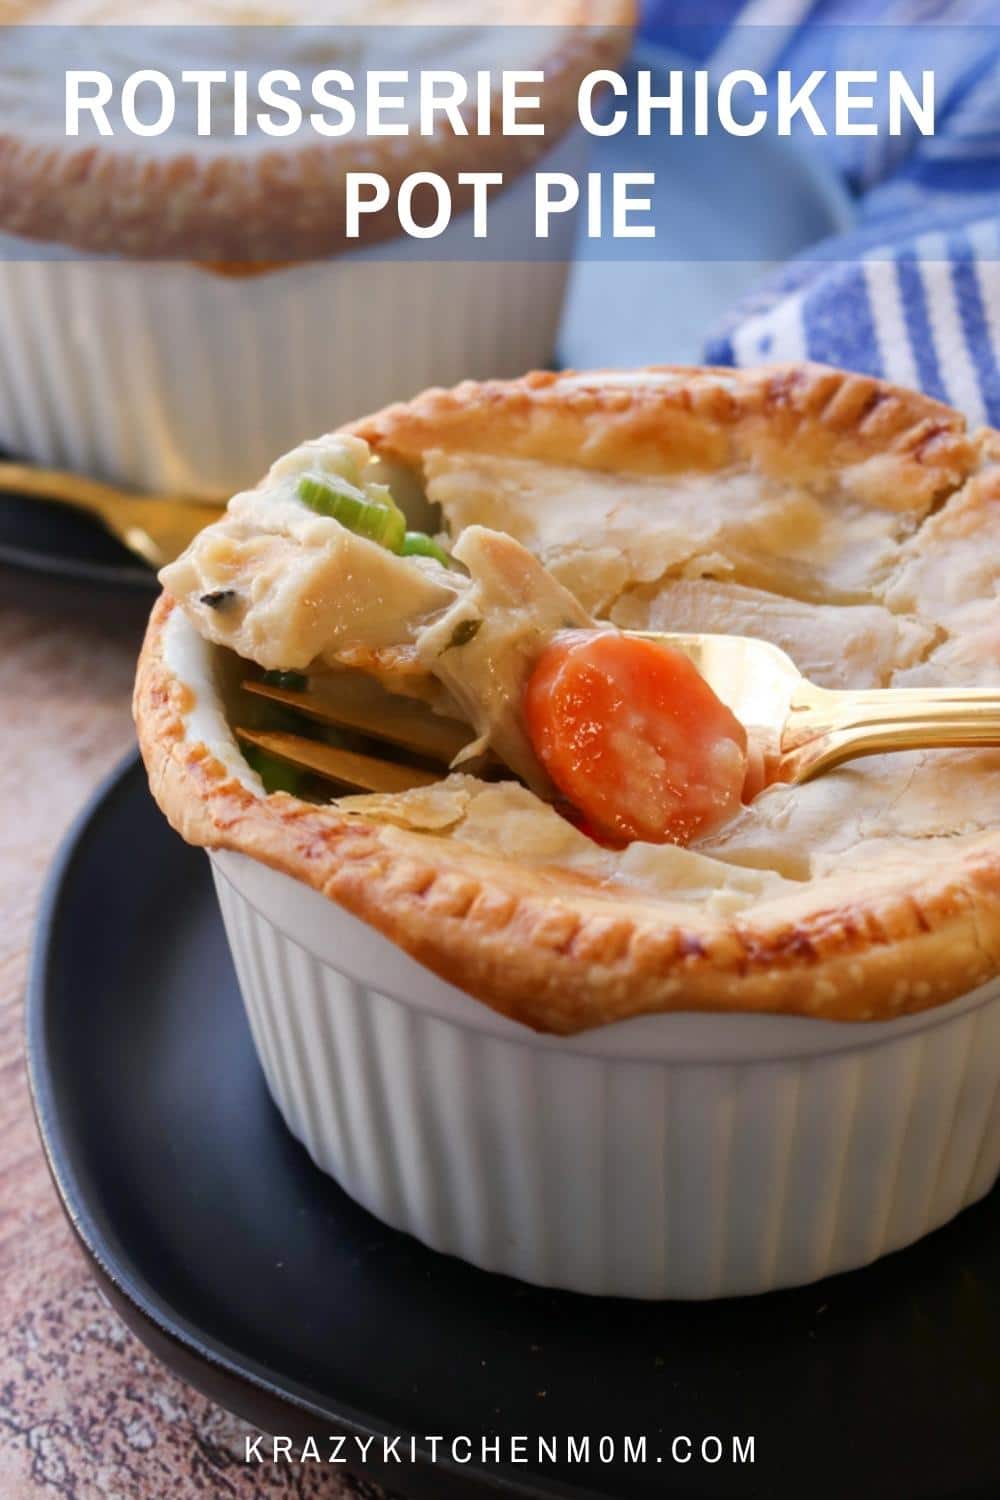 There's nothing more comforting than a steaming hot serving of homemade chicken pot pie right from the oven. via @krazykitchenmom